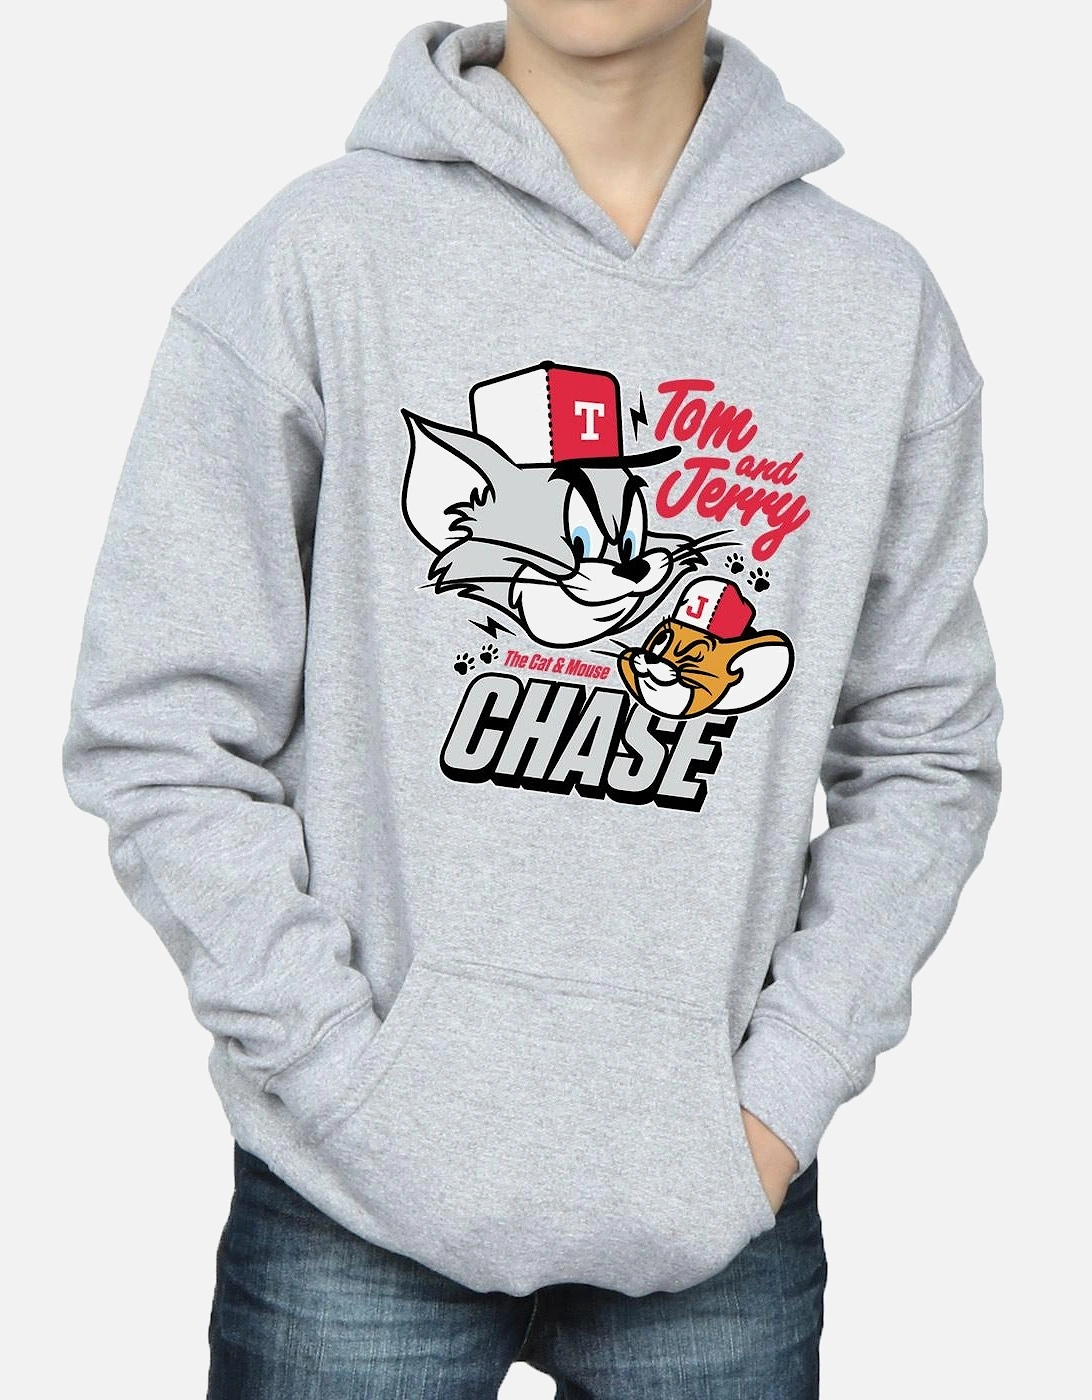 Tom And Jerry Boys Cat & Mouse Chase Hoodie